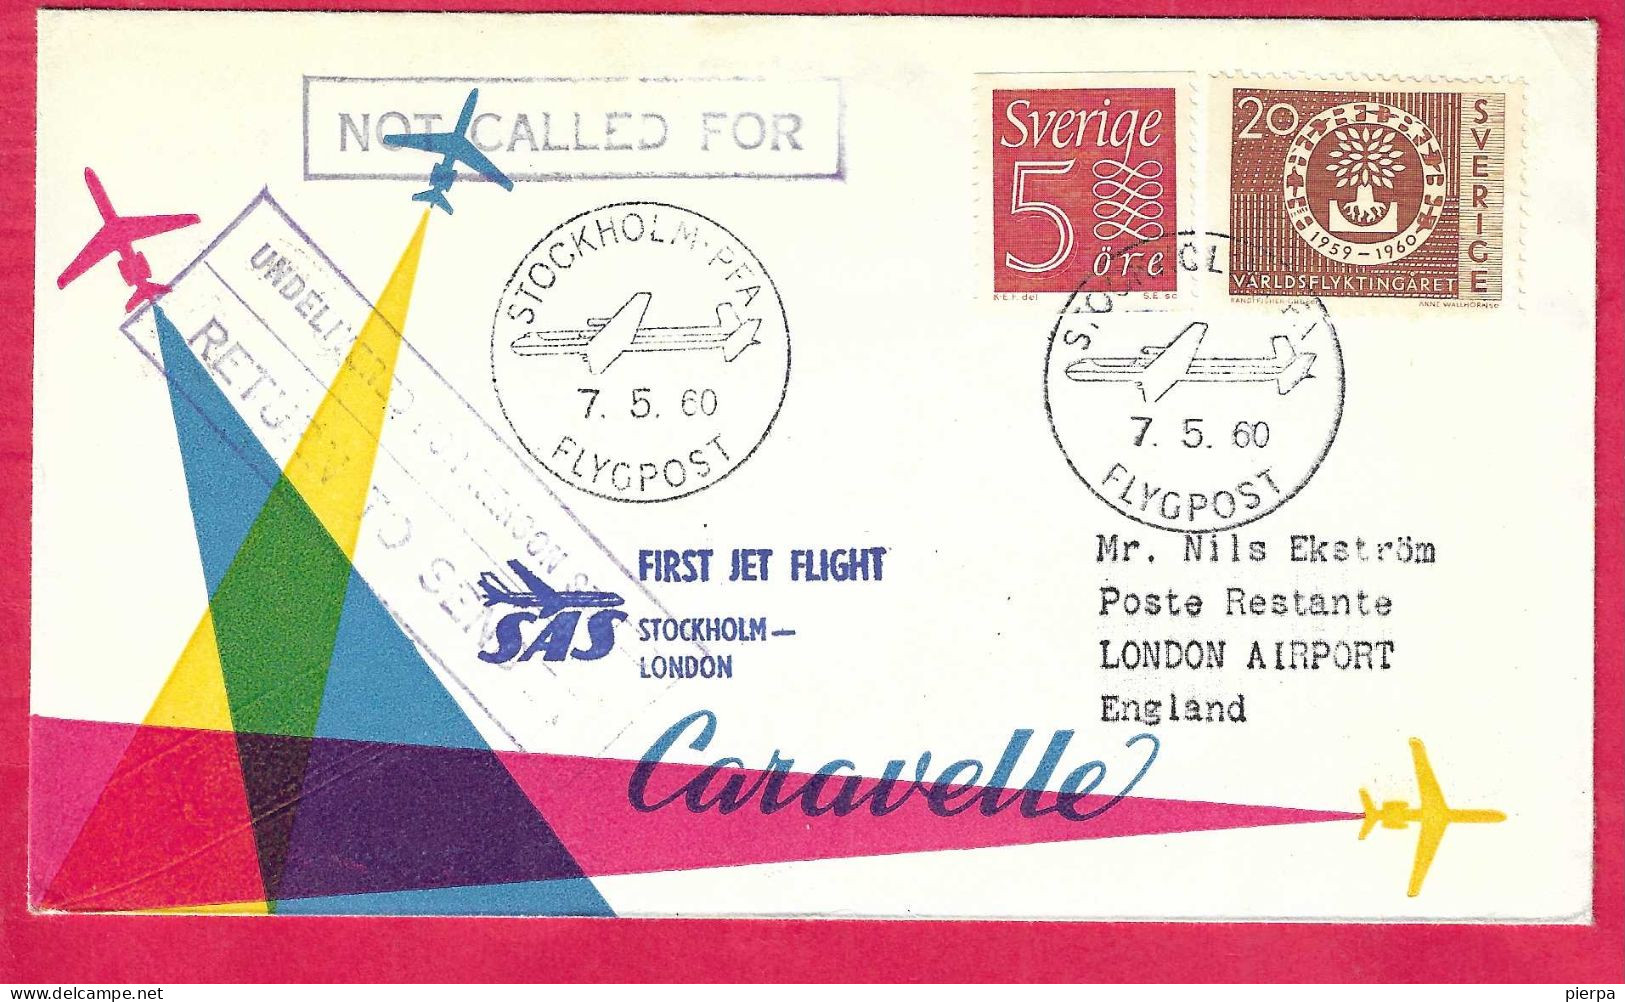 SVERIGE - FIRST CARAVELLE FLIGHT SAS  FROM STOCKHOLM TO LONDON *7.5.60* ON OFFICIAL COVER - Storia Postale